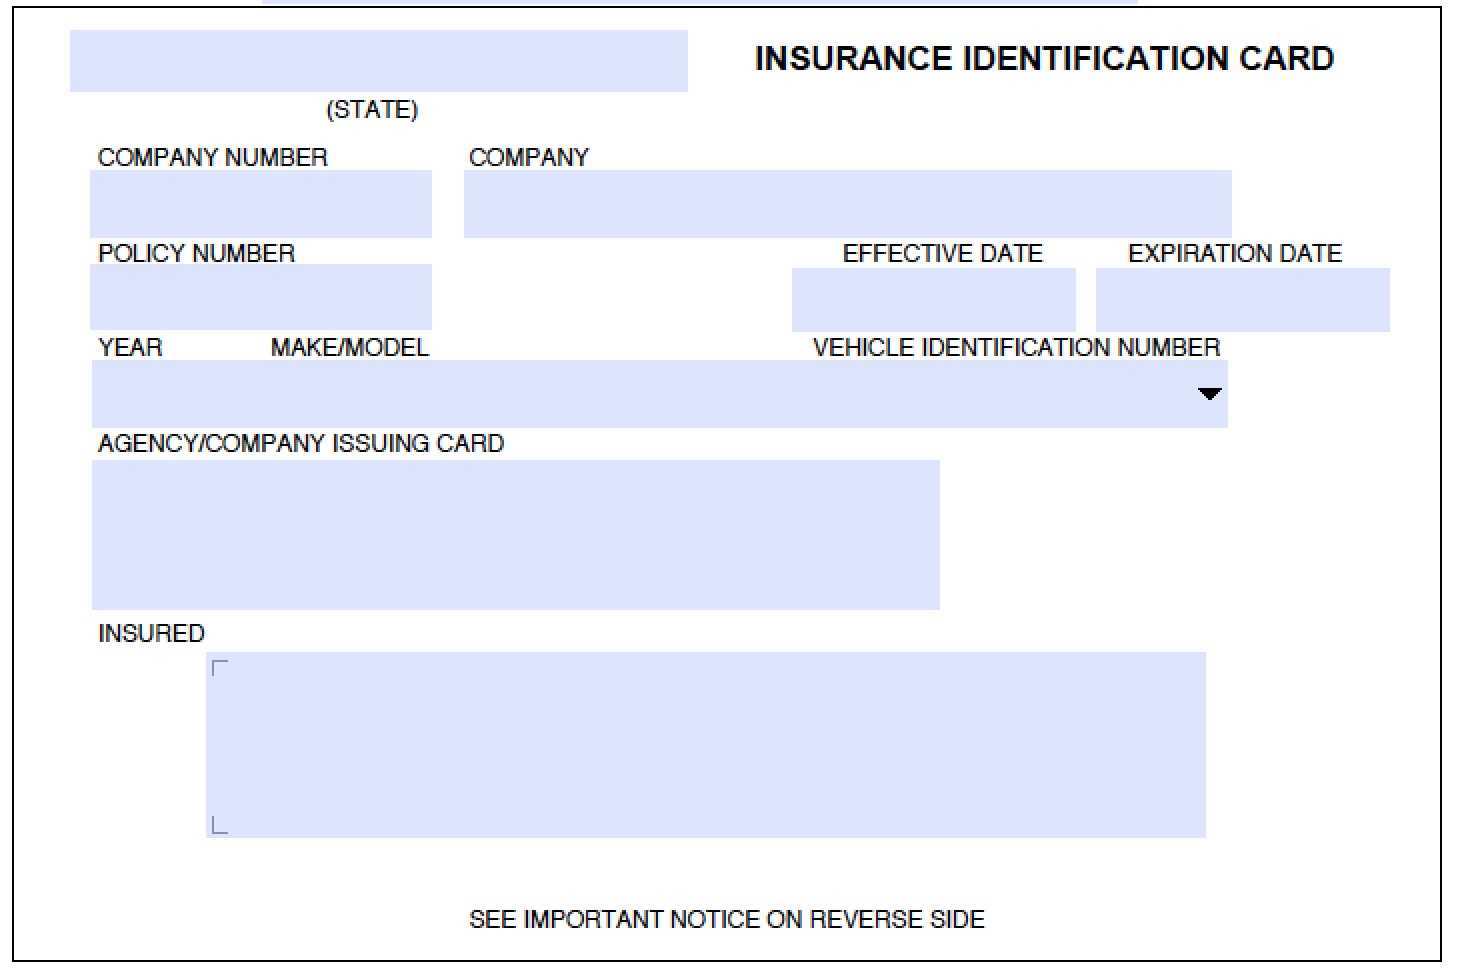 012 Company Car Policy Template Free Auto Insurance Id Card Pertaining To Car Insurance Card Template Free